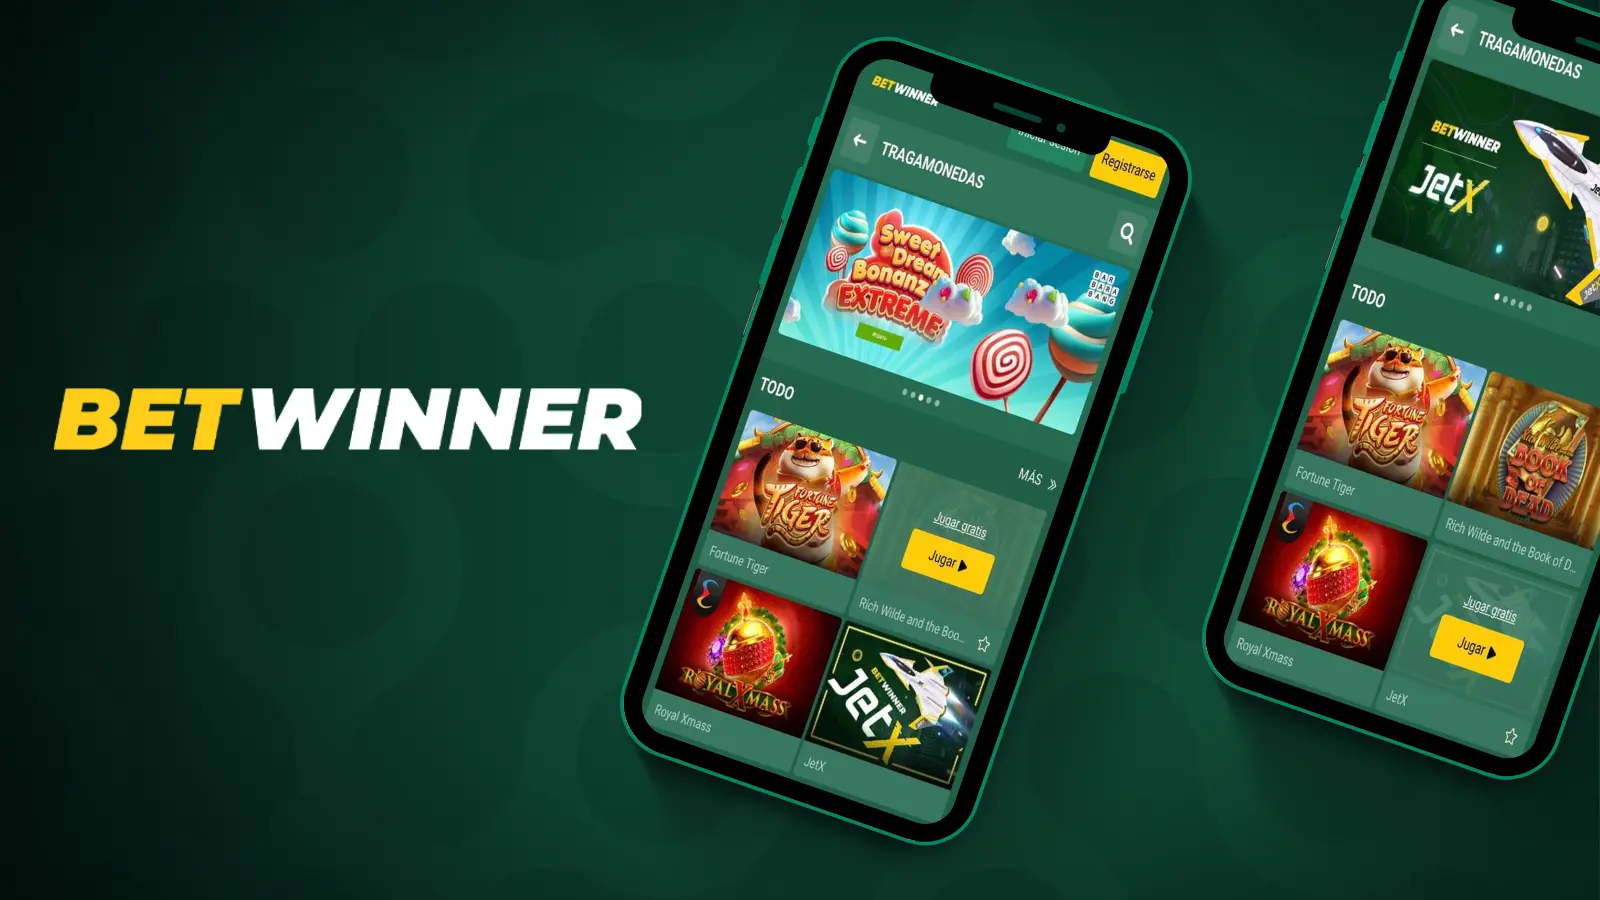 Payments on BetWinner